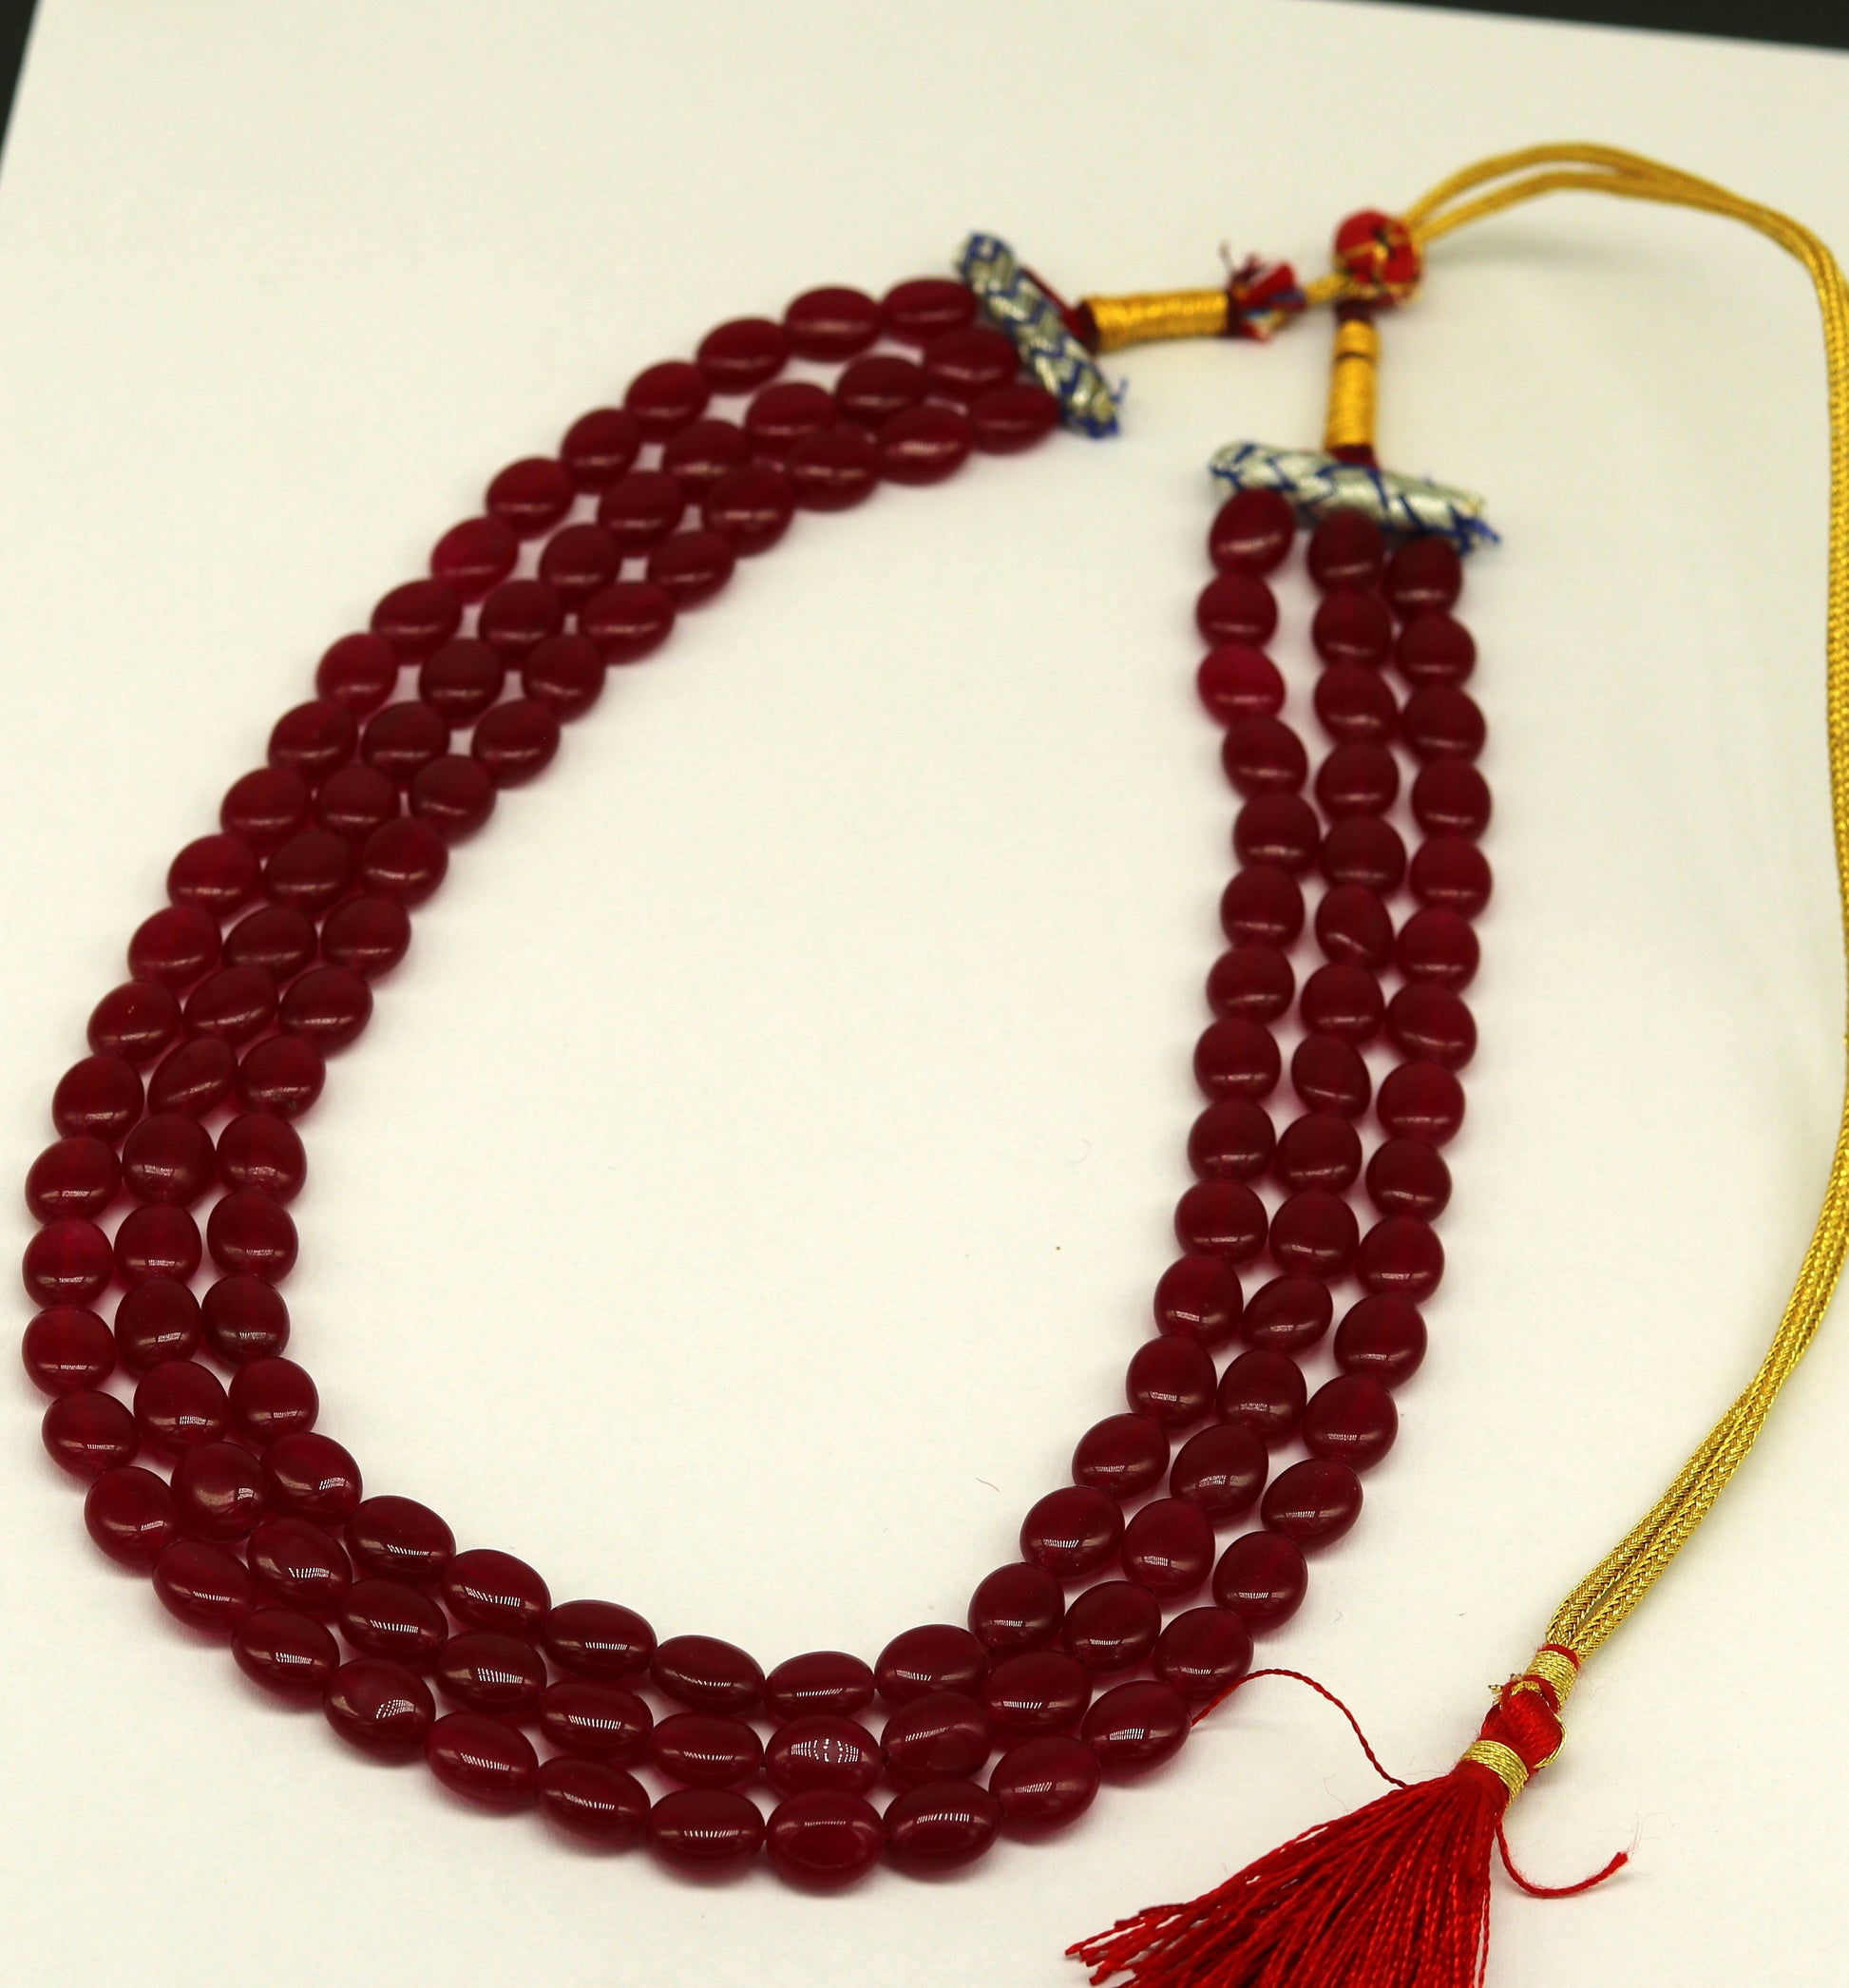 Amazing 3 strands oval Red jade gemstone penalized necklace, gorgeous customized wedding anniversary bridal necklace charm jewelry set126 - TRIBAL ORNAMENTS